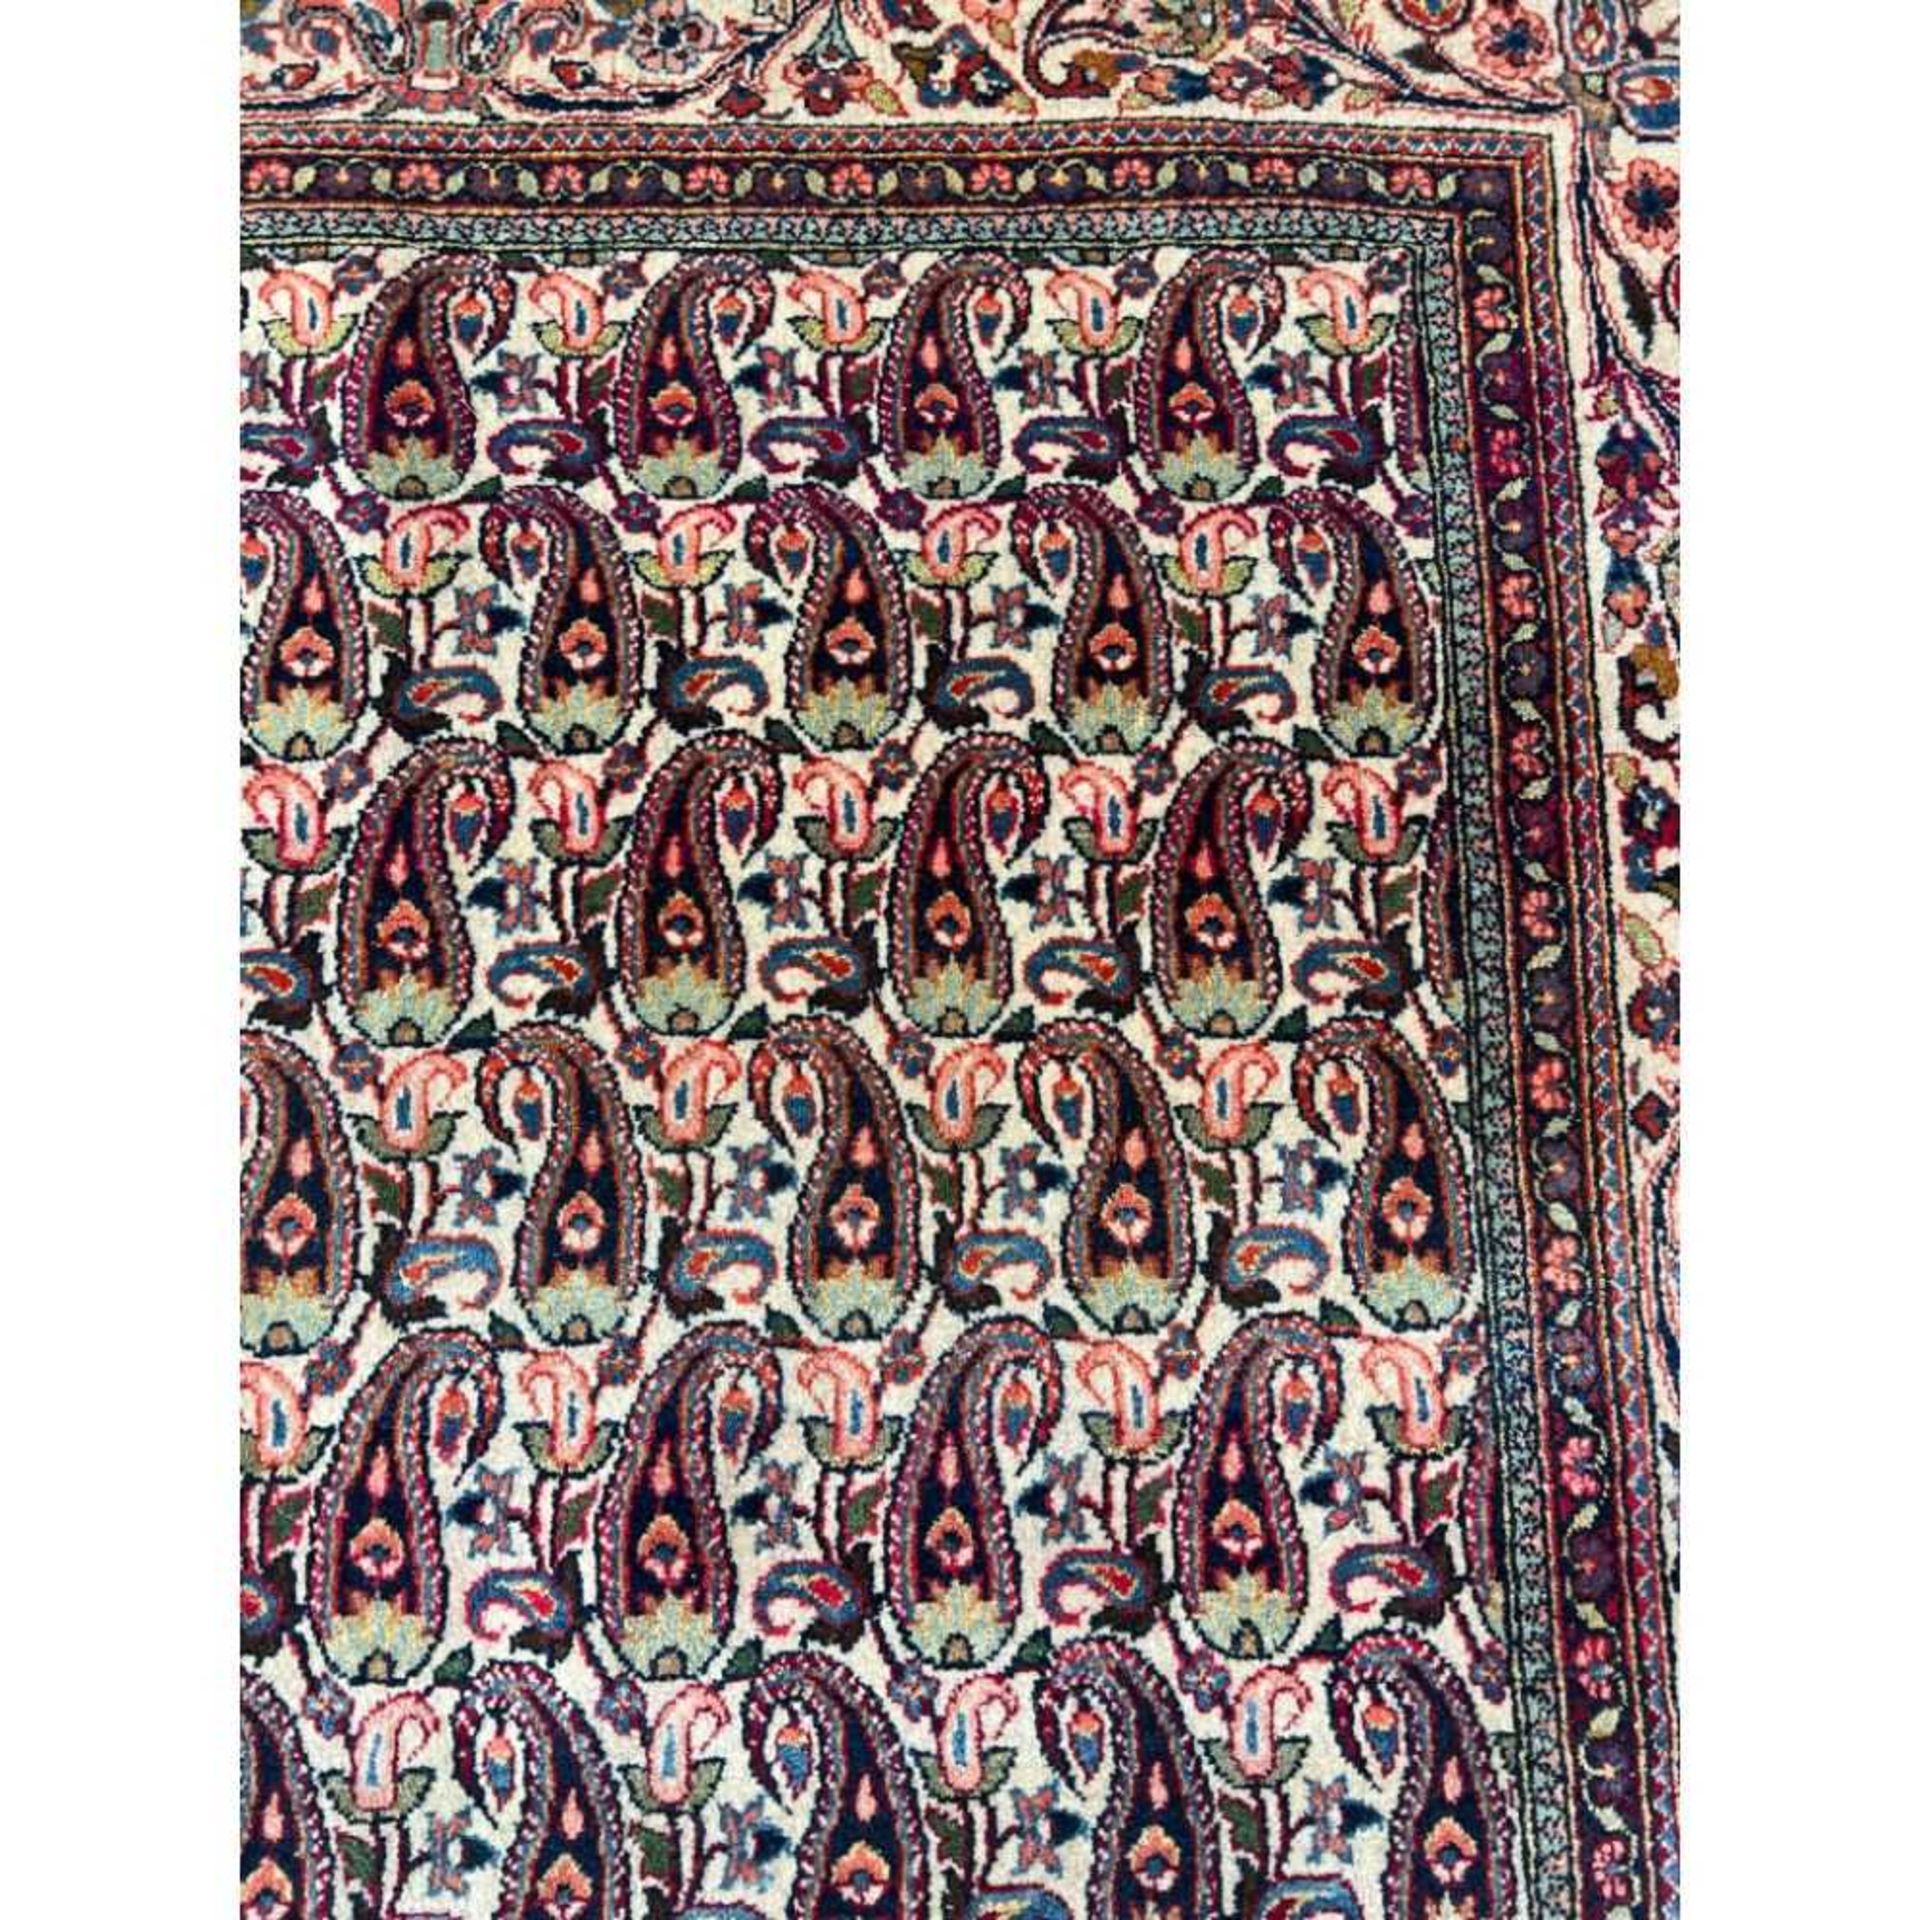 A MID 20TH CENTURY KASHAN CARPET - Image 4 of 6